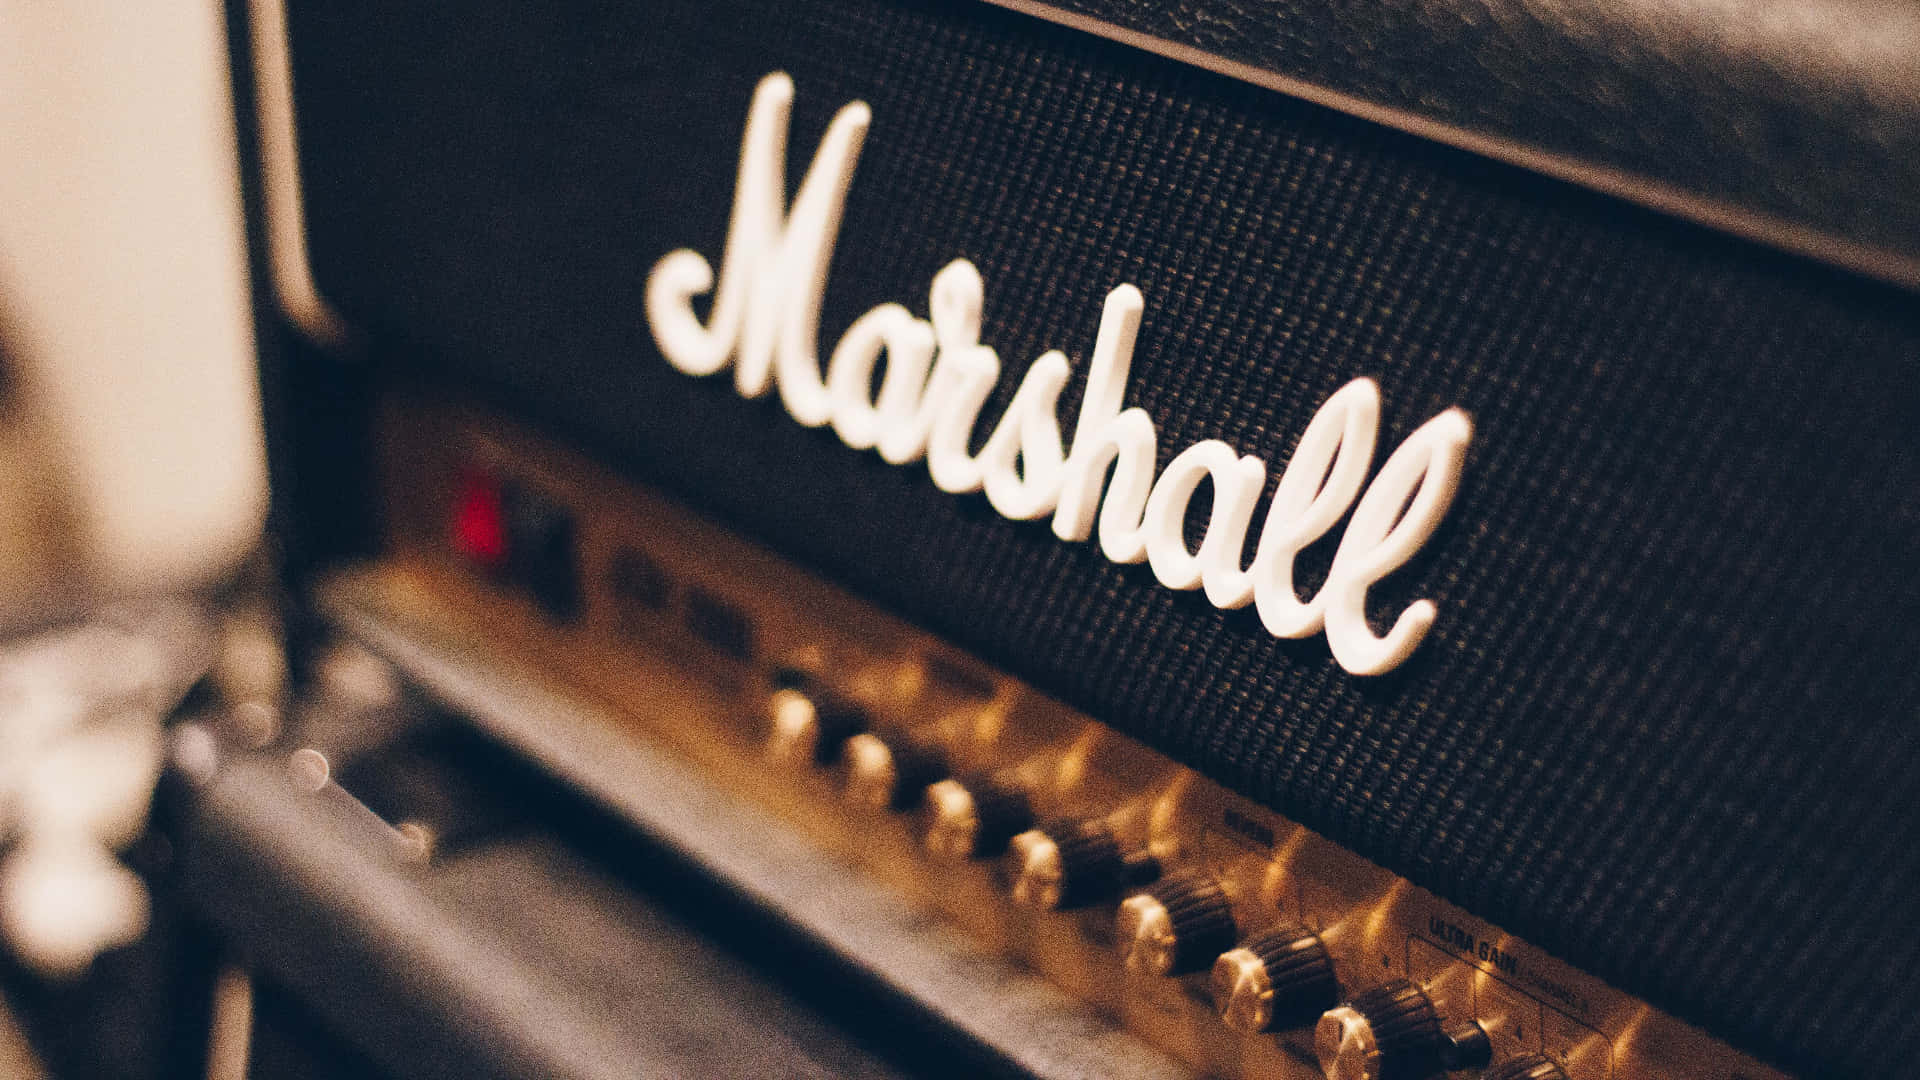 Marshall Amps - The Best Amps For Guitar